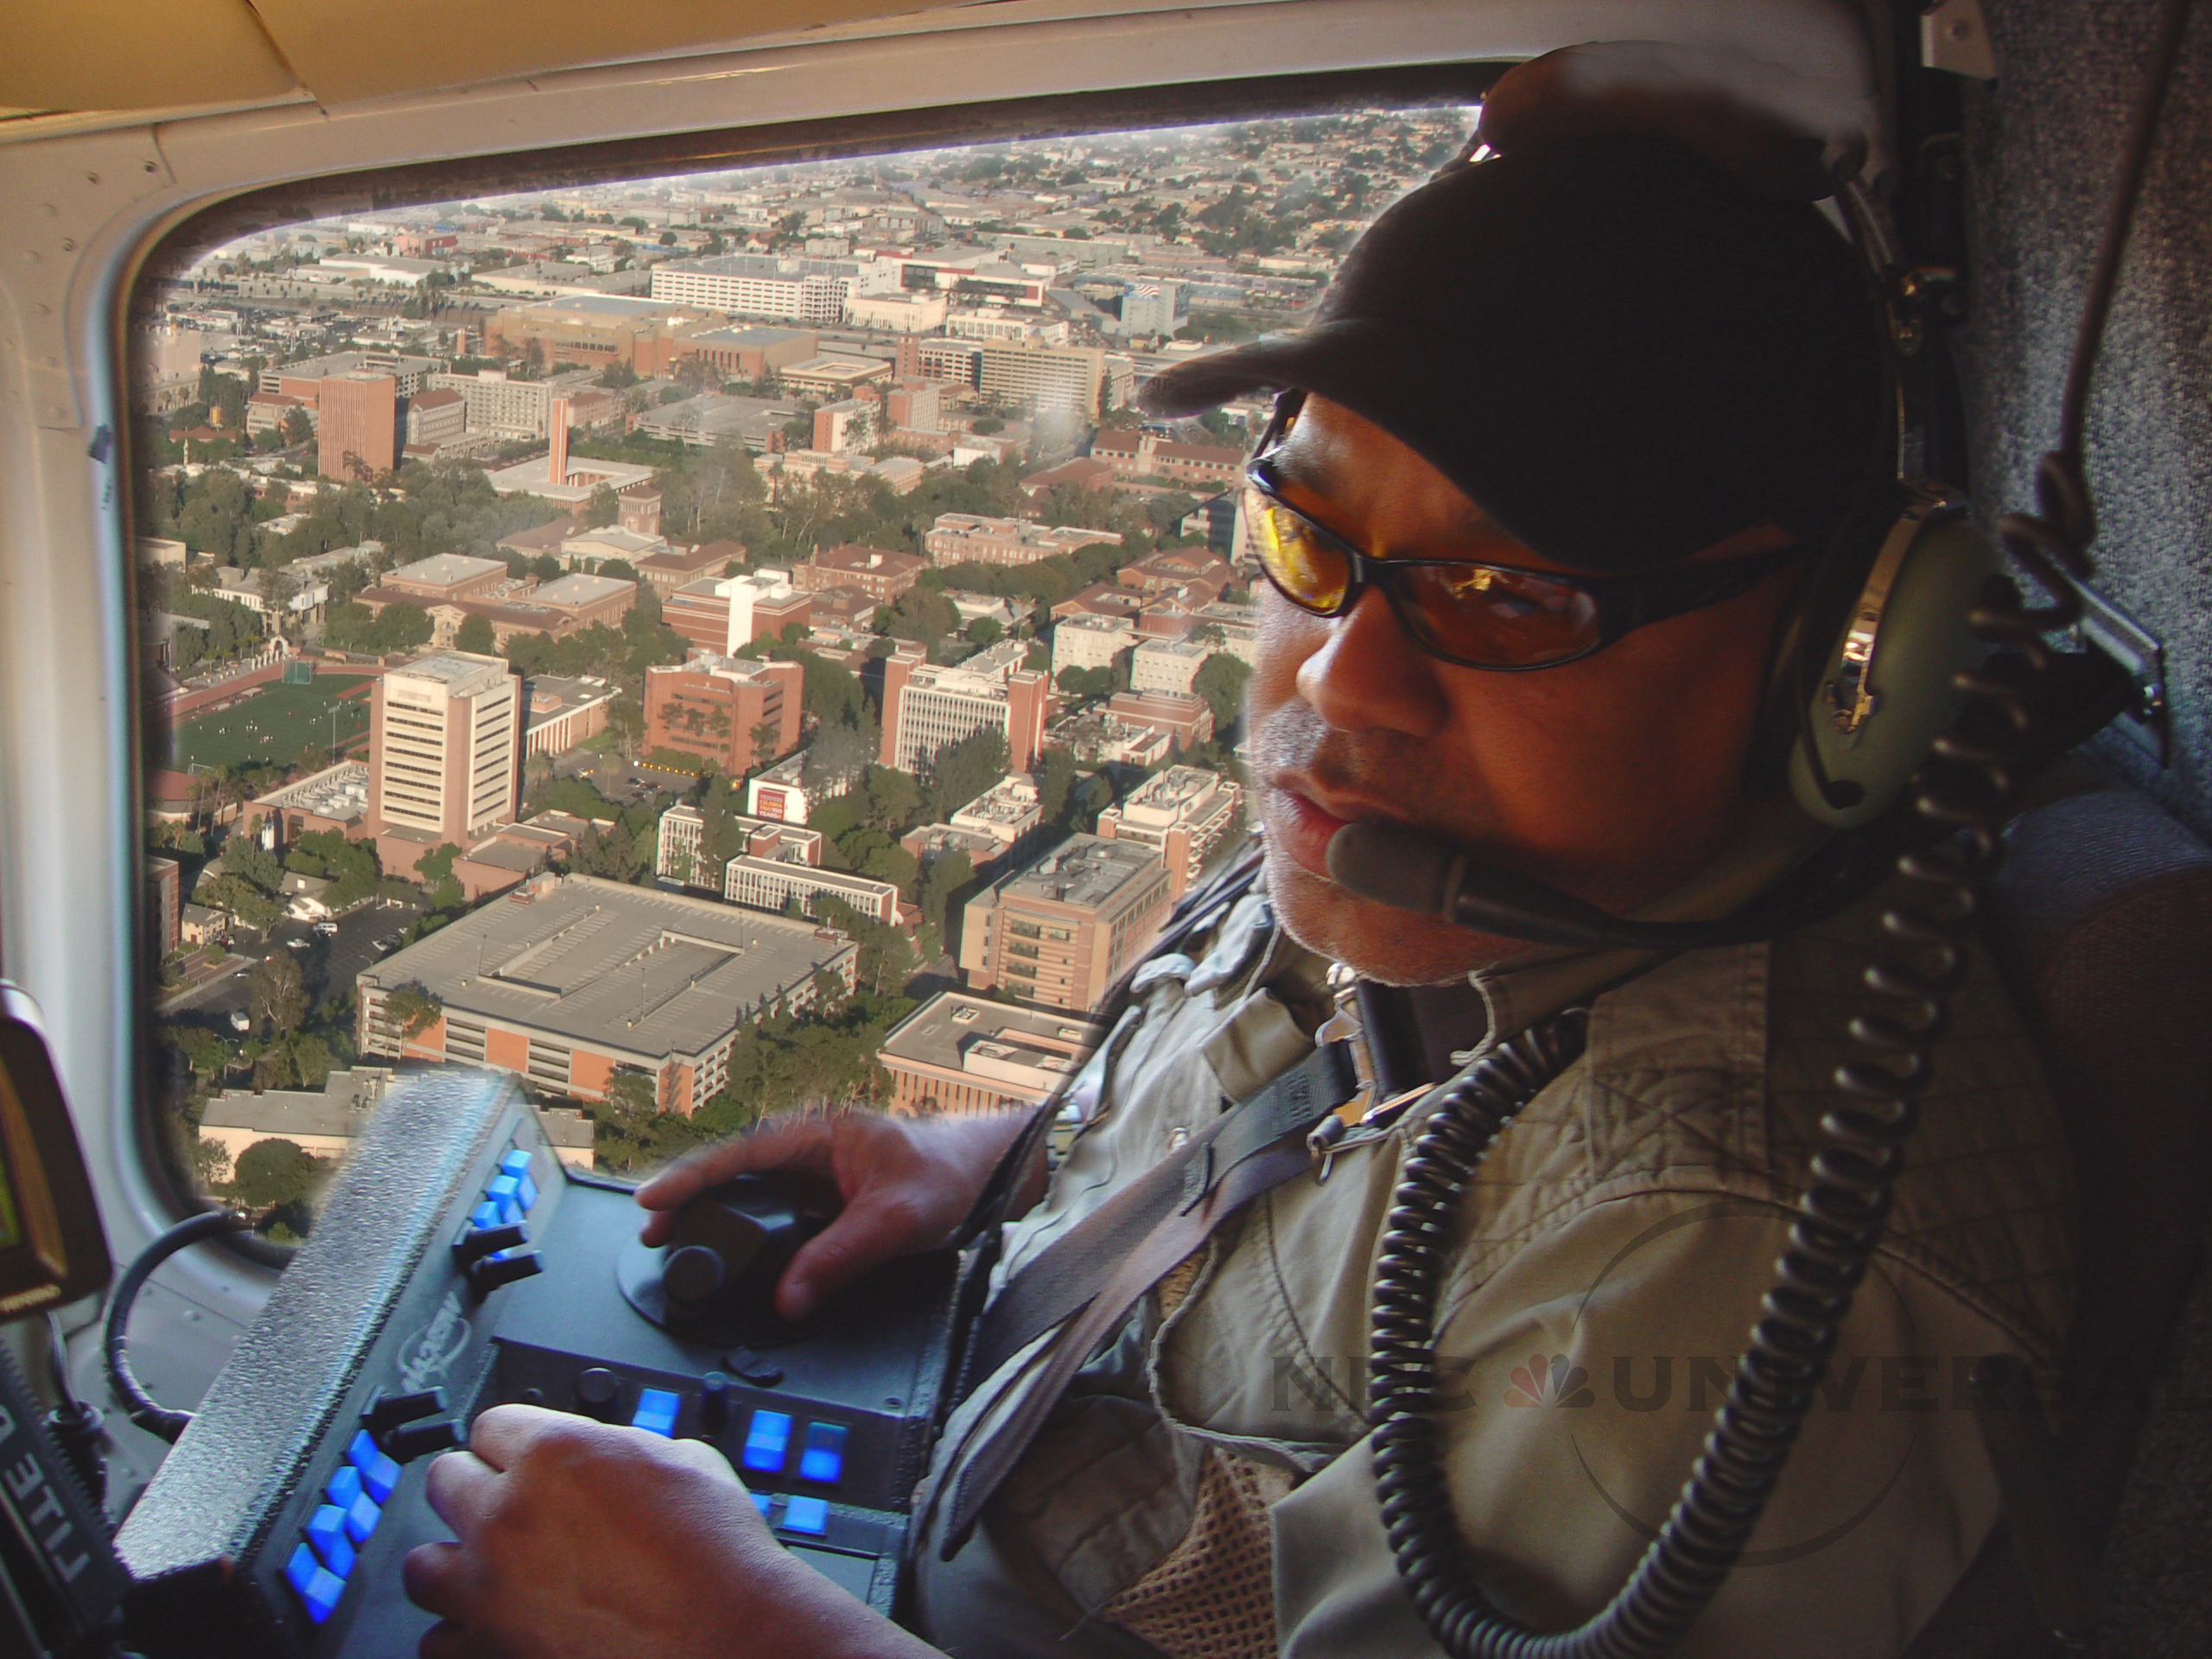 Filming network promo over Los Angeles for NBC NIGHTLY NEWS